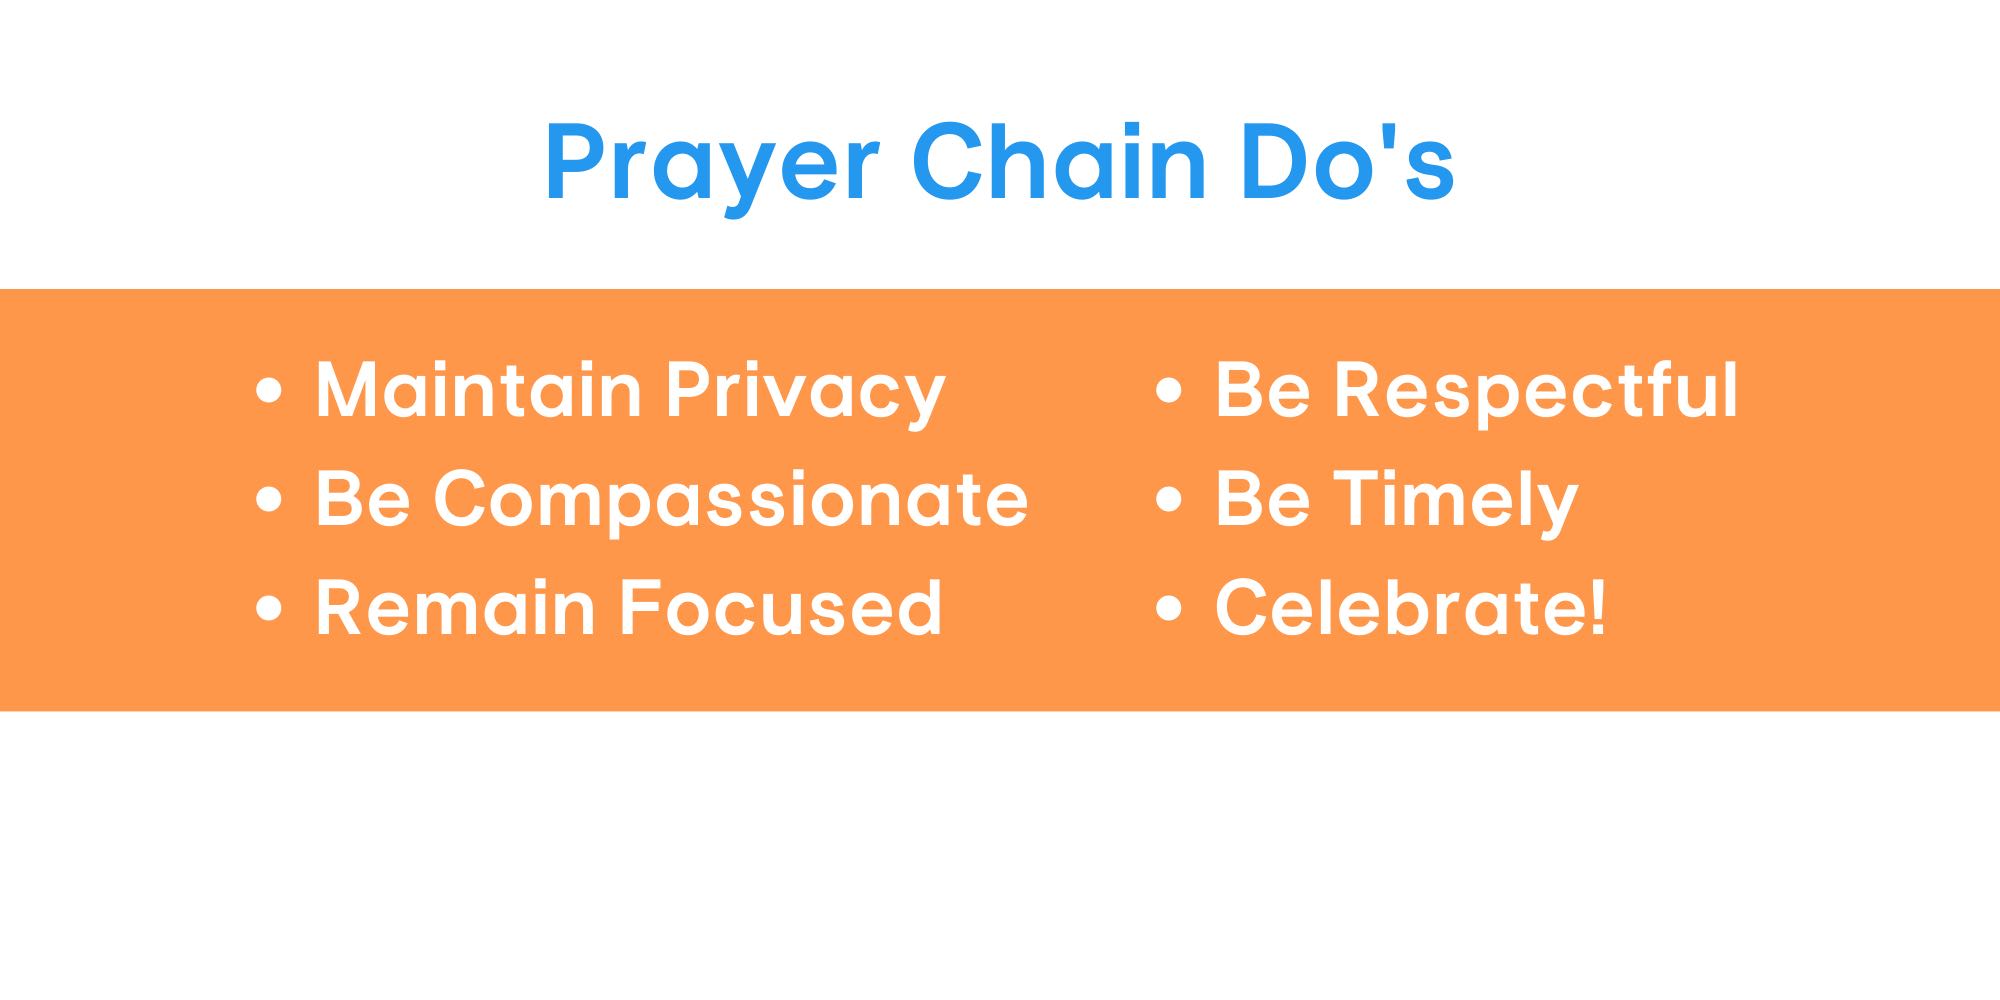 This is what you should do in your prayer ministry